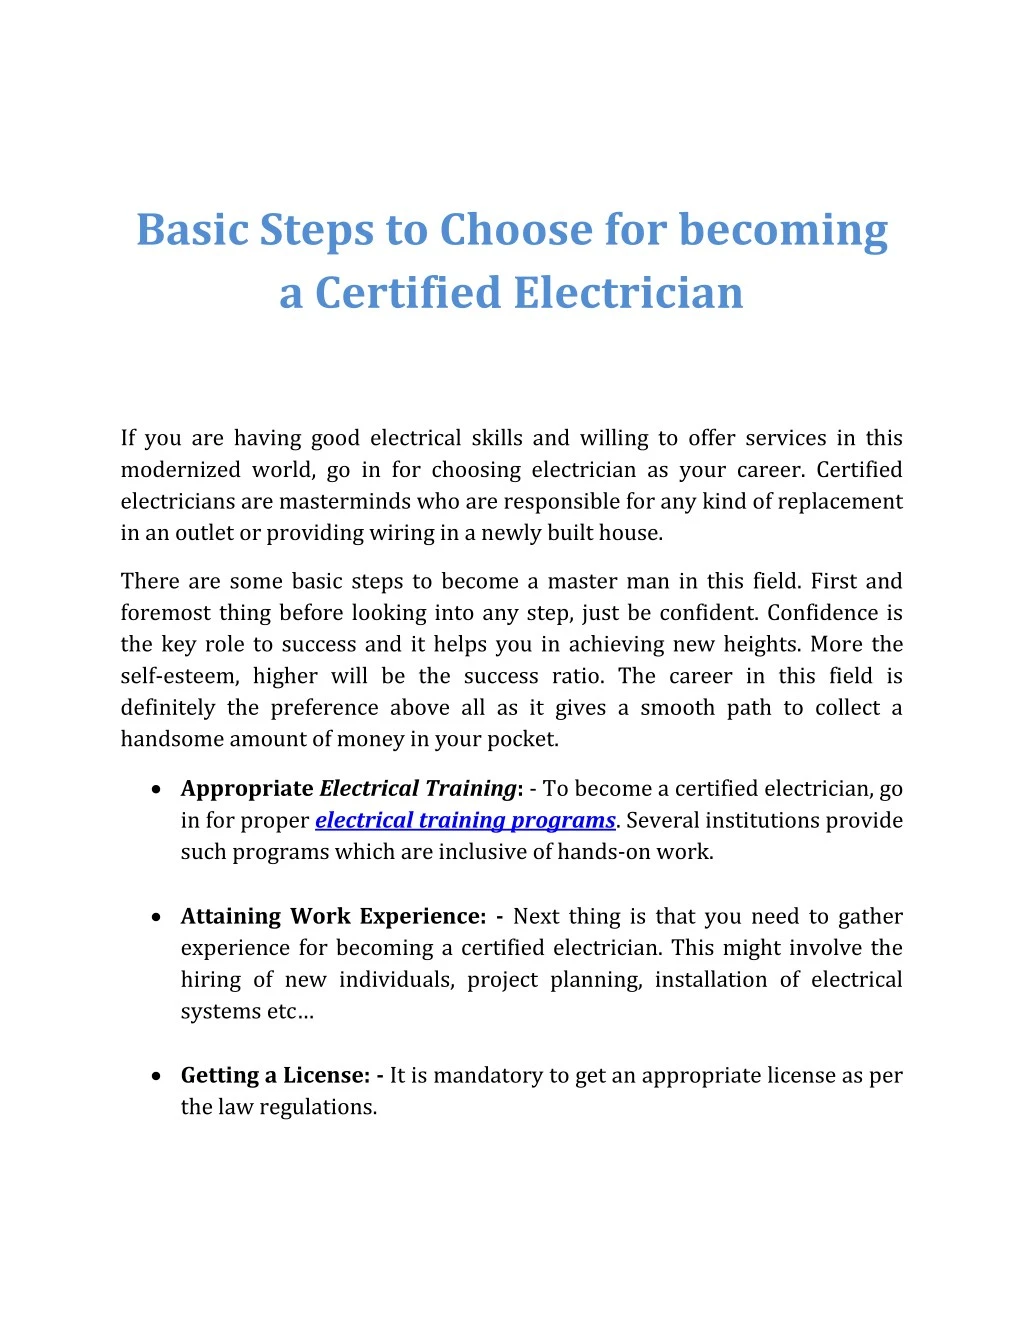 basic steps to choose for becoming a certified